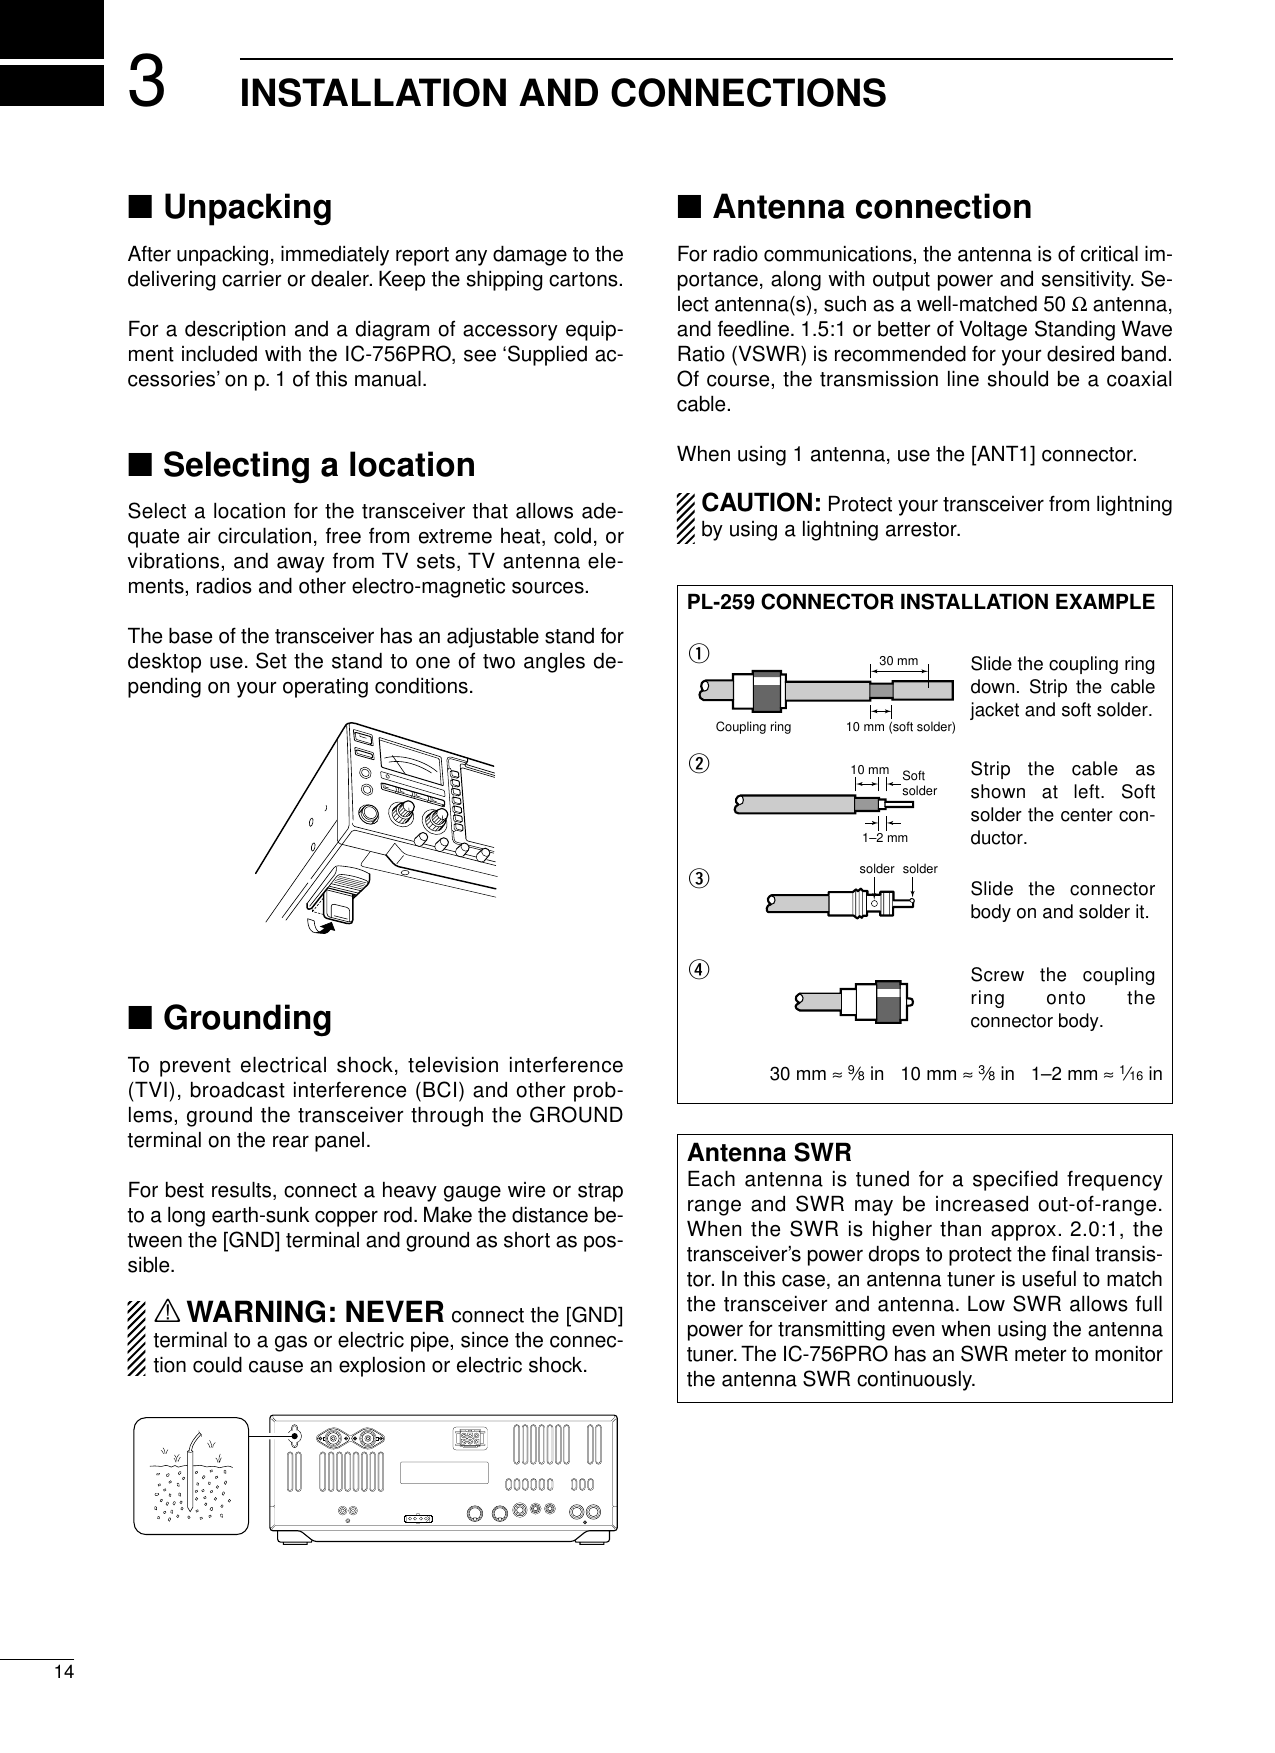 314INSTALLATION AND CONNECTIONS■UnpackingAfter unpacking, immediately report any damage to thedelivering carrier or dealer. Keep the shipping cartons.For a description and a diagram of accessory equip-ment included with the IC-756PRO, see ‘Supplied ac-cessories’on p. 1 of this manual.■Selecting a locationSelect a location for the transceiver that allows ade-quate air circulation, free from extreme heat, cold, orvibrations, and away from TV sets, TV antenna ele-ments, radios and other electro-magnetic sources.The base of the transceiver has an adjustable stand fordesktop use. Set the stand to one of two angles de-pending on your operating conditions.■GroundingTo prevent electrical shock, television interference(TVI), broadcast interference (BCI) and other prob-lems, ground the transceiver through the GROUNDterminal on the rear panel.For best results, connect a heavy gauge wire or strapto a long earth-sunk copper rod. Make the distance be-tween the [GND] terminal and ground as short as pos-sible.RWARNING: NEVER connect the [GND]terminal to a gas or electric pipe, since the connec-tion could cause an explosion or electric shock.■Antenna connectionFor radio communications, the antenna is of critical im-portance, along with output power and sensitivity. Se-lect antenna(s), such as a well-matched 50 Ωantenna,and feedline. 1.5:1 or better of Voltage Standing WaveRatio (VSWR) is recommended for your desired band.Of course, the transmission line should be a coaxialcable.When using 1 antenna, use the [ANT1] connector.CAUTION: Protect your transceiver from lightningby using a lightning arrestor.Antenna SWREach antenna is tuned for a specified frequencyrange and SWR may be increased out-of-range.When the SWR is higher than approx. 2.0:1, thetransceiver’s power drops to protect the ﬁnal transis-tor. In this case, an antenna tuner is useful to matchthe transceiver and antenna. Low SWR allows fullpower for transmitting even when using the antennatuner. The IC-756PRO has an SWR meter to monitorthe antenna SWR continuously.PL-259 CONNECTOR INSTALLATION EXAMPLE30 mm ≈9⁄8in   10 mm ≈3⁄8in   1–2 mm ≈1⁄16 in30 mm10 mm (soft solder)10 mm1–2 mmsolder solderSoftsolderCoupling ringSlide the coupling ring down. Strip the cable jacket and soft solder.Slide the connector body on and solder it.Screw the coupling ring onto the connector body.Strip the cable as shown at left. Soft solder the center con-ductor.qwer